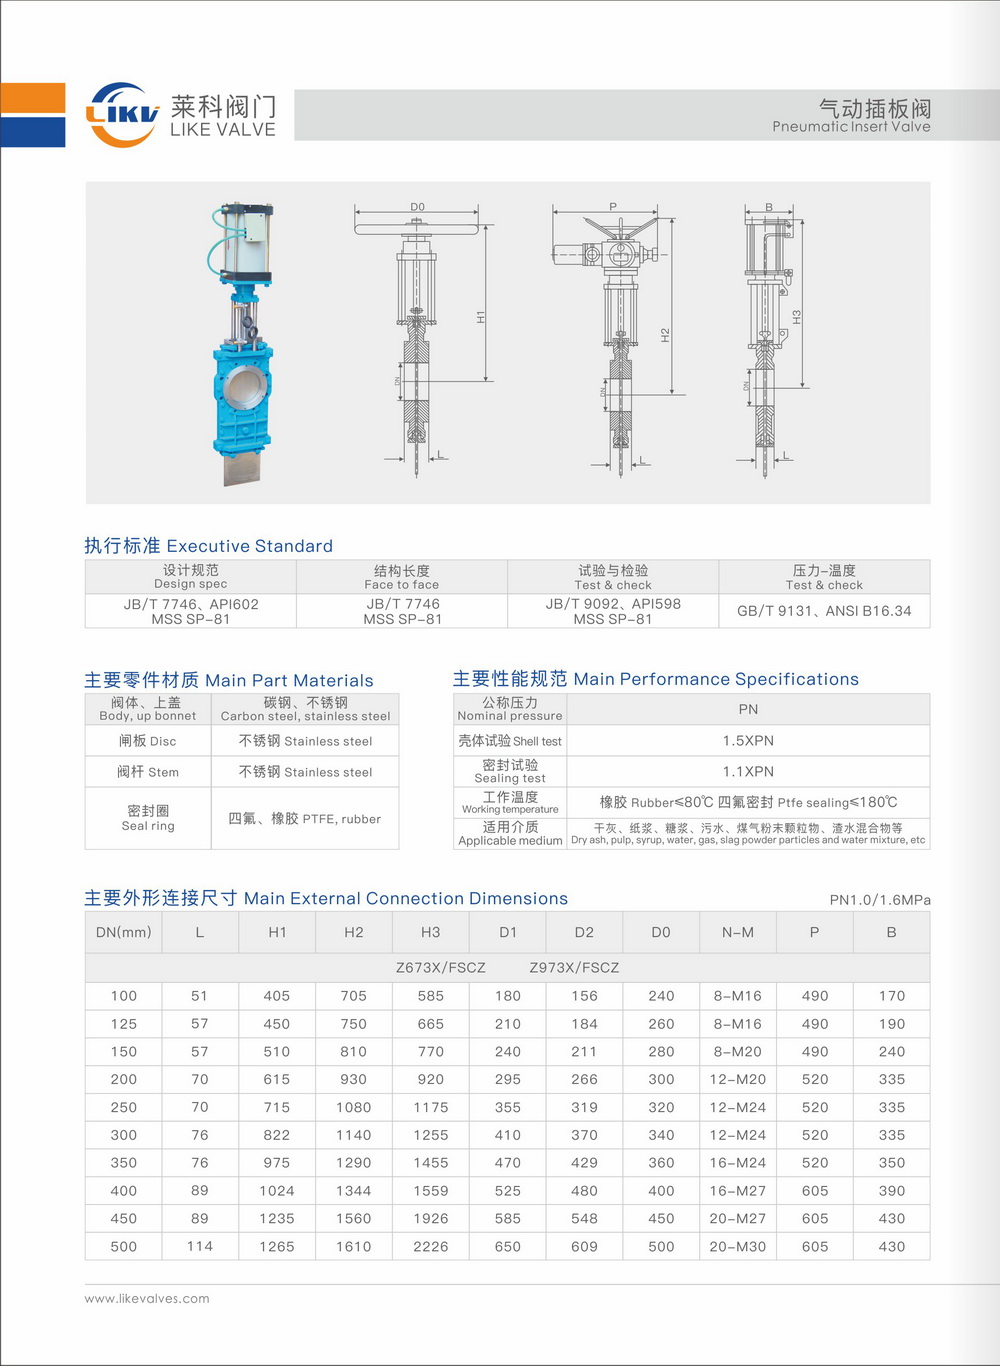 Chinese Pneumatic Plug in Valves: Key Components of Industrial Control